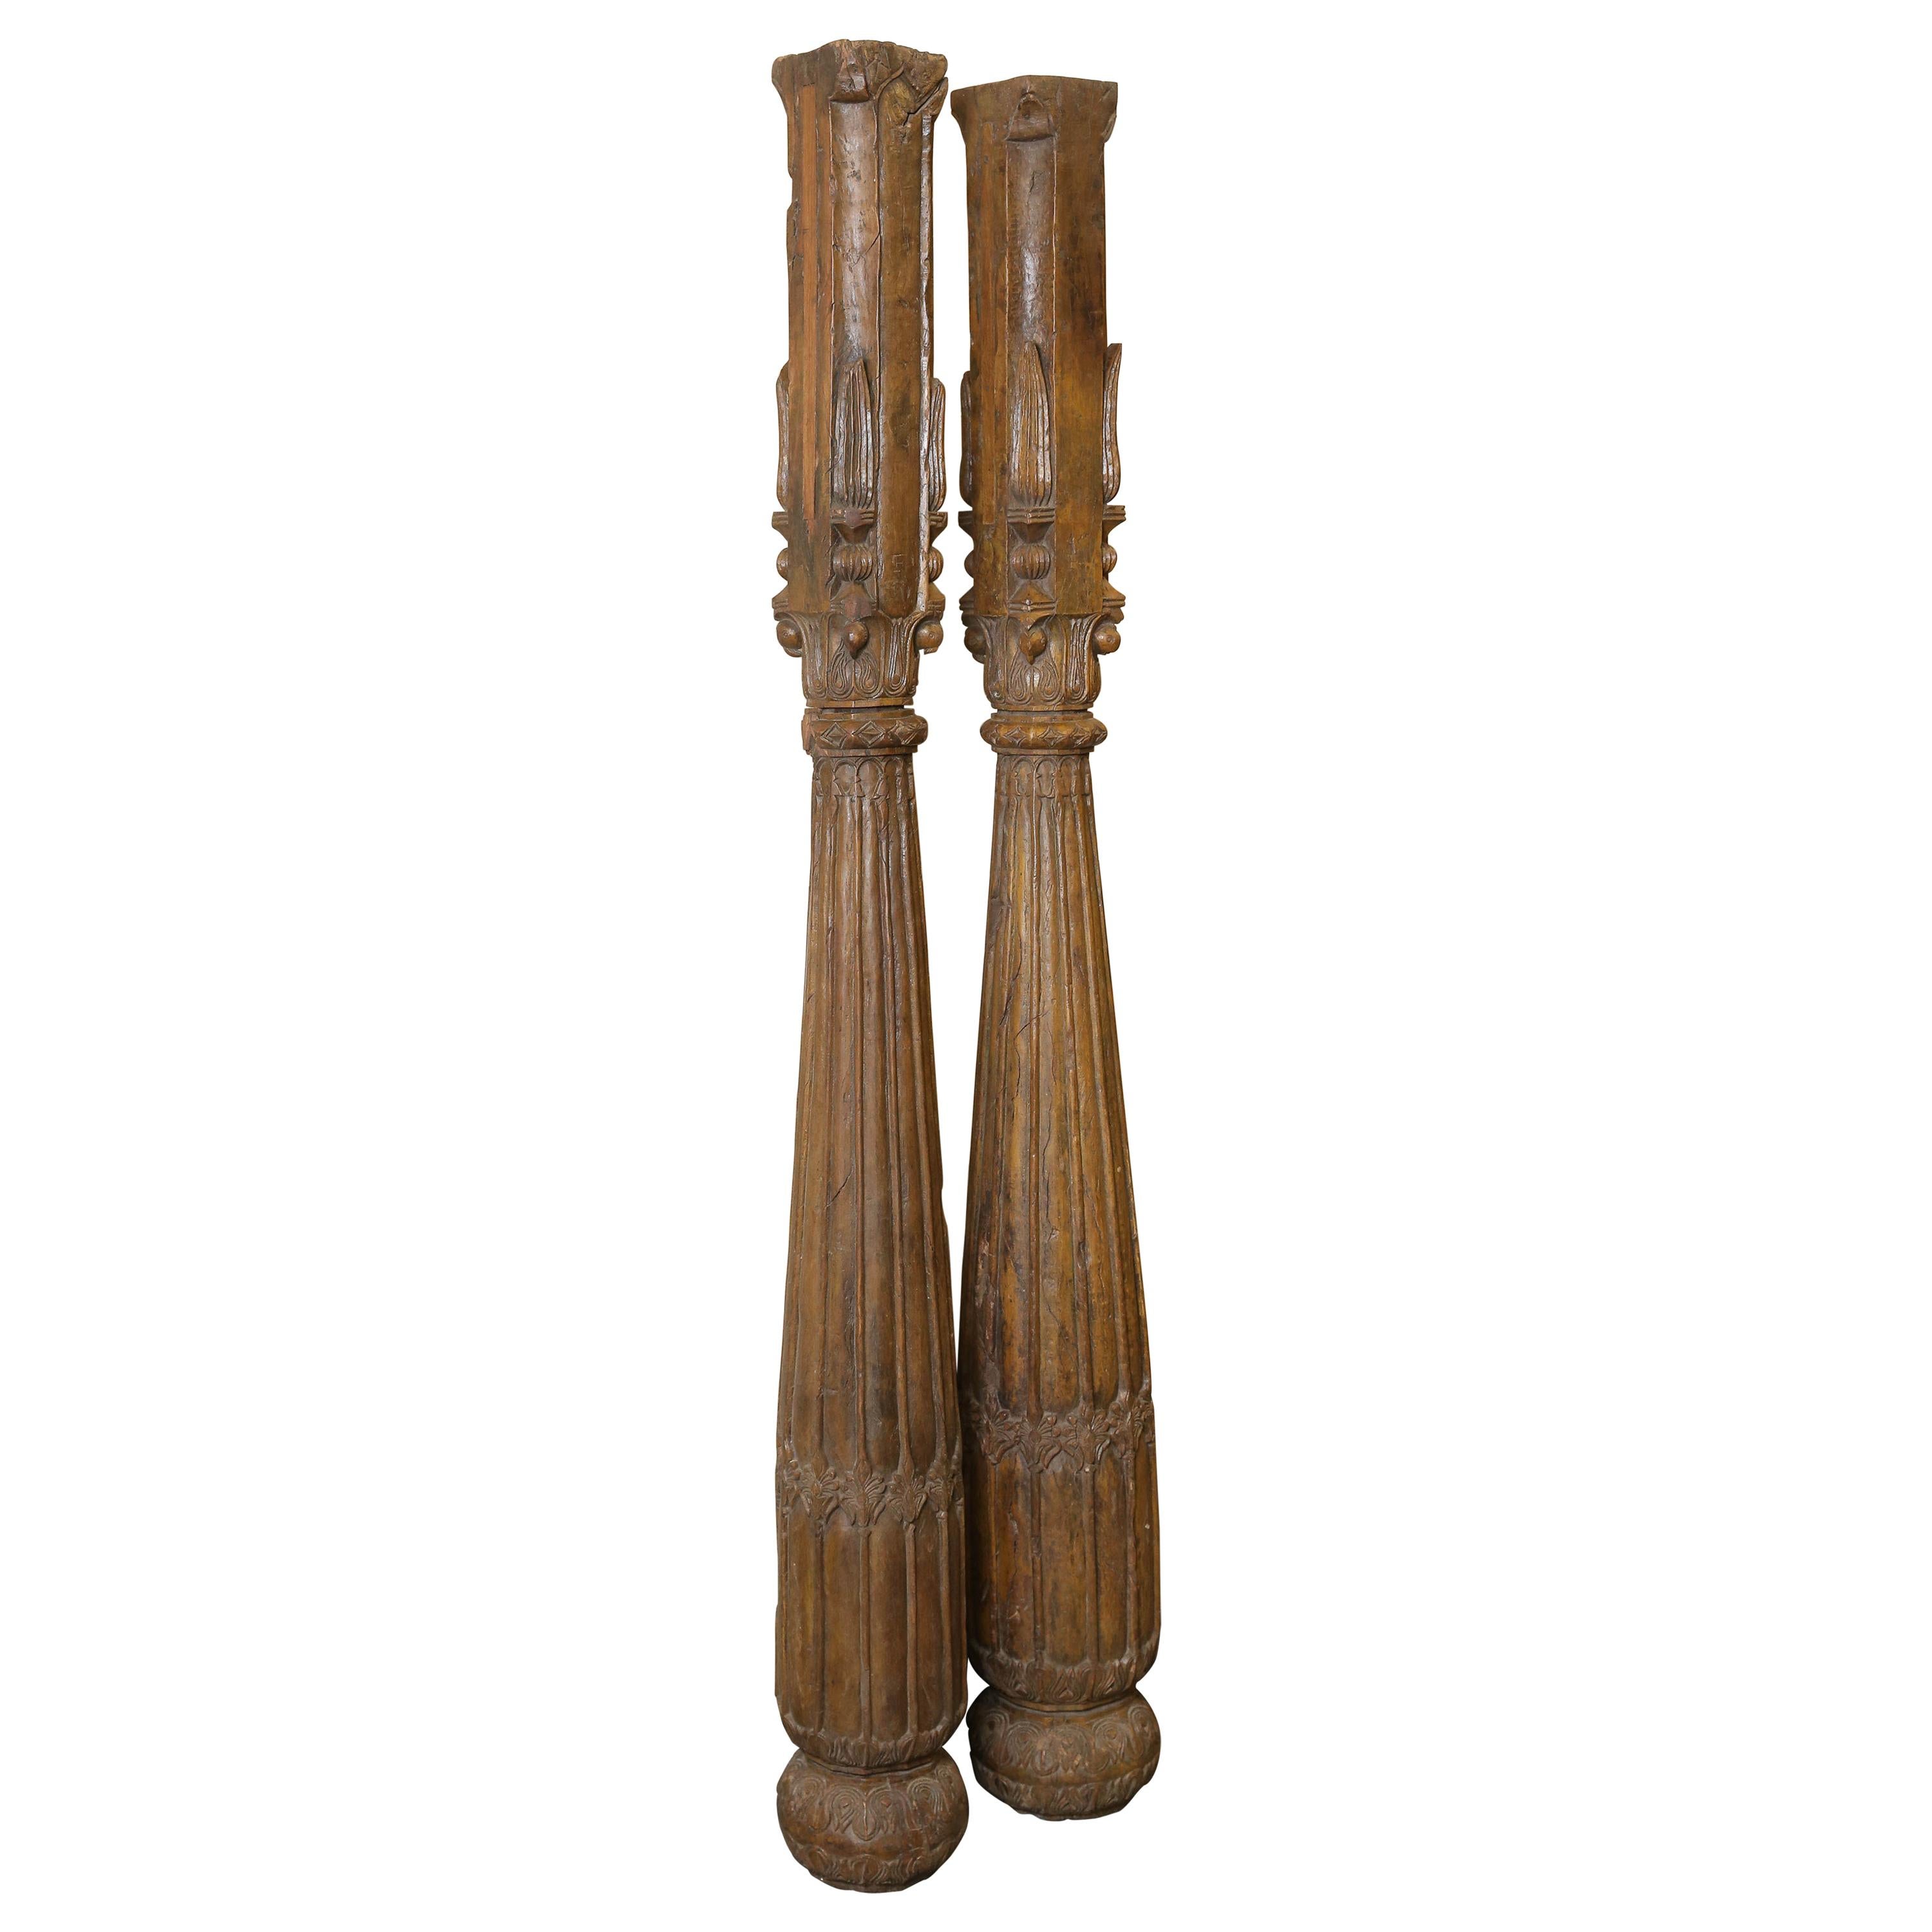 19th Century Solid Teak Wood Indoor Shaped Columns from Chettinad in South India For Sale